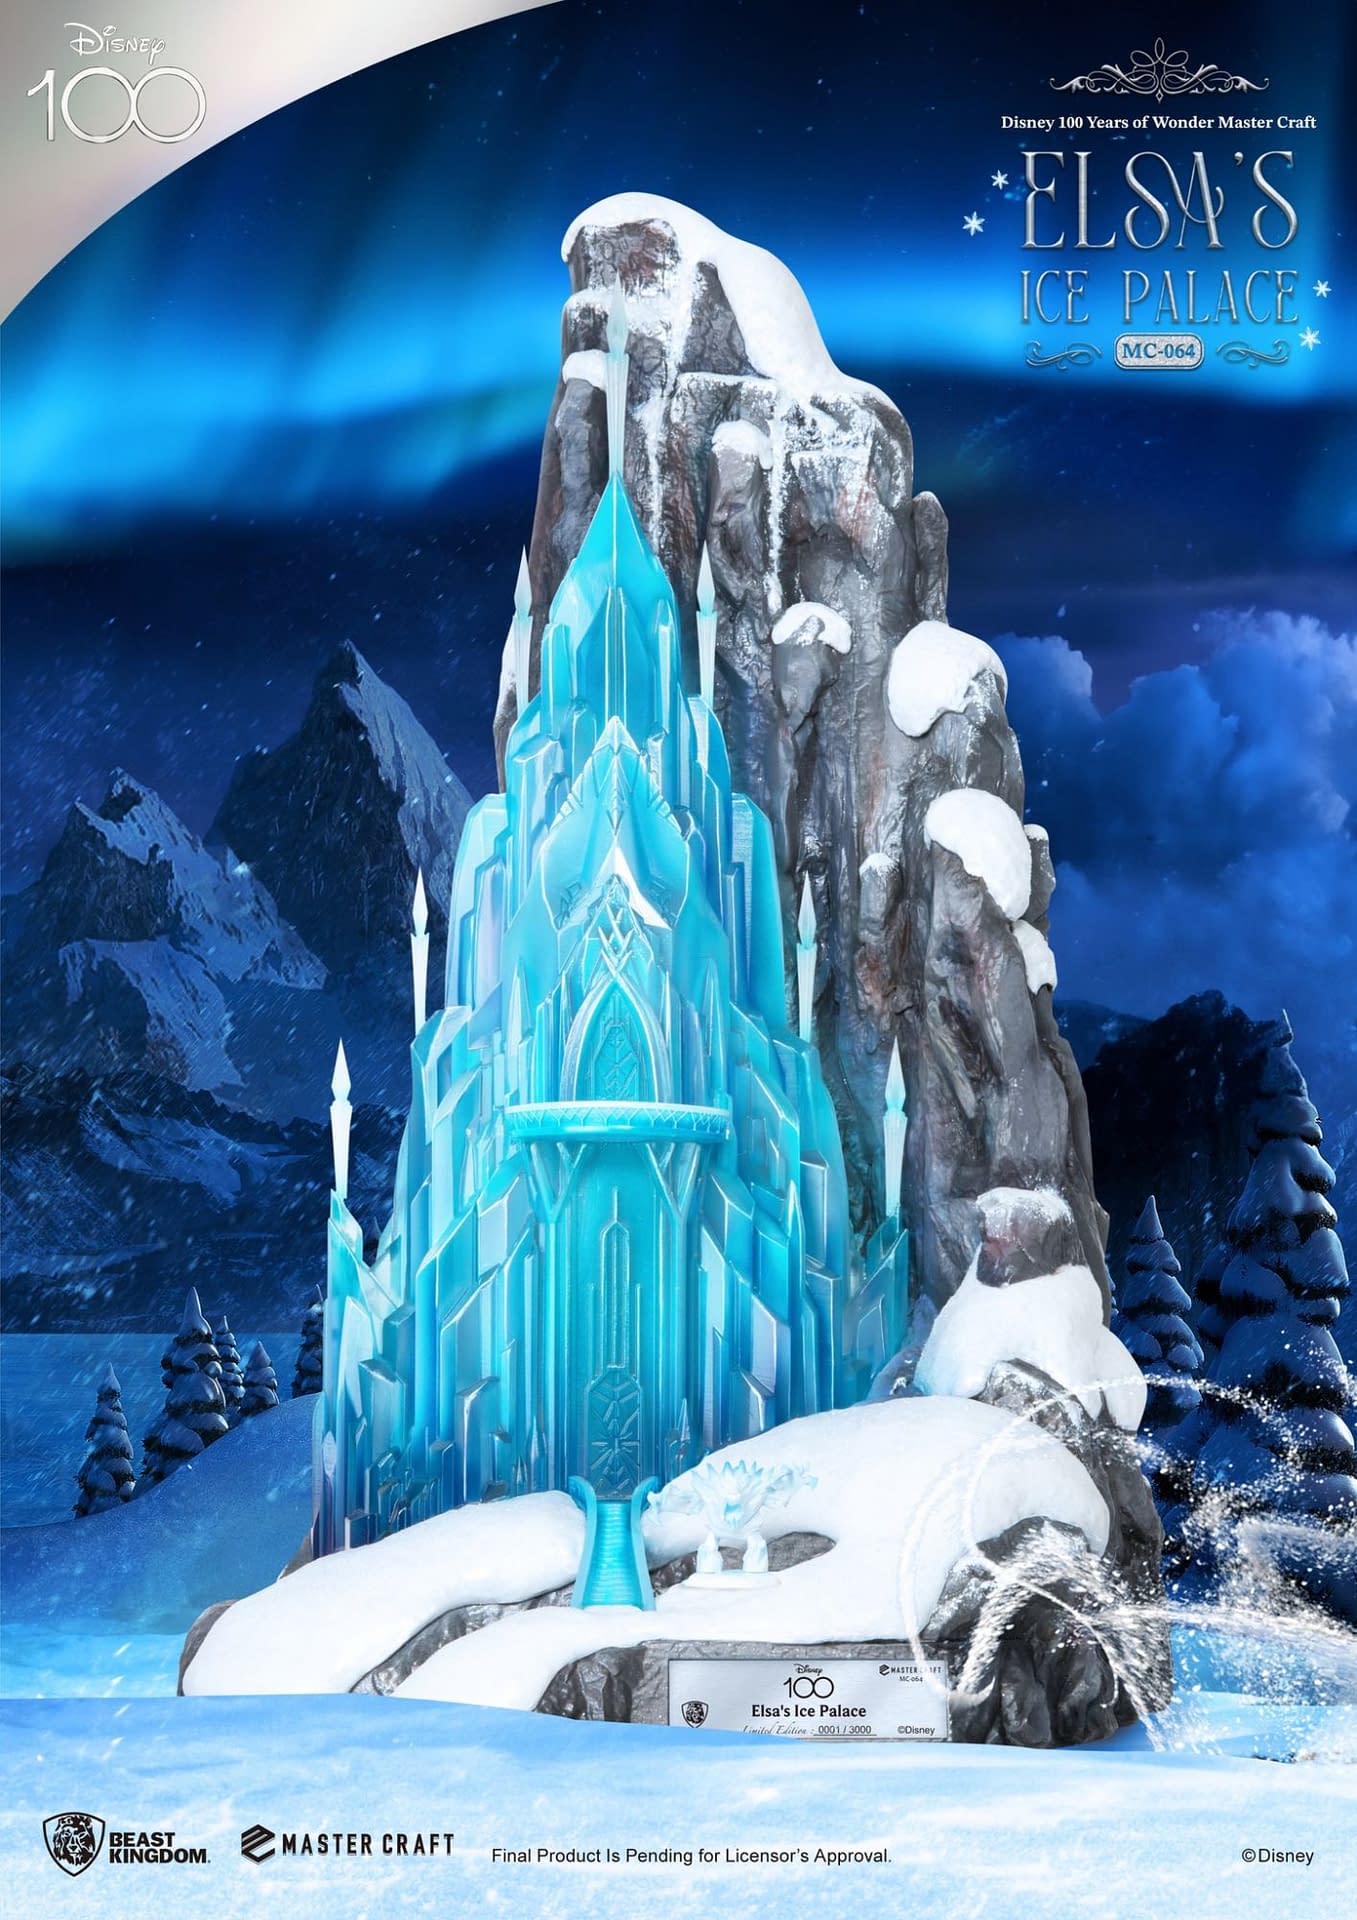 Let it Go with Beast Kingdom's New Disney Frozen Master Craft Statue